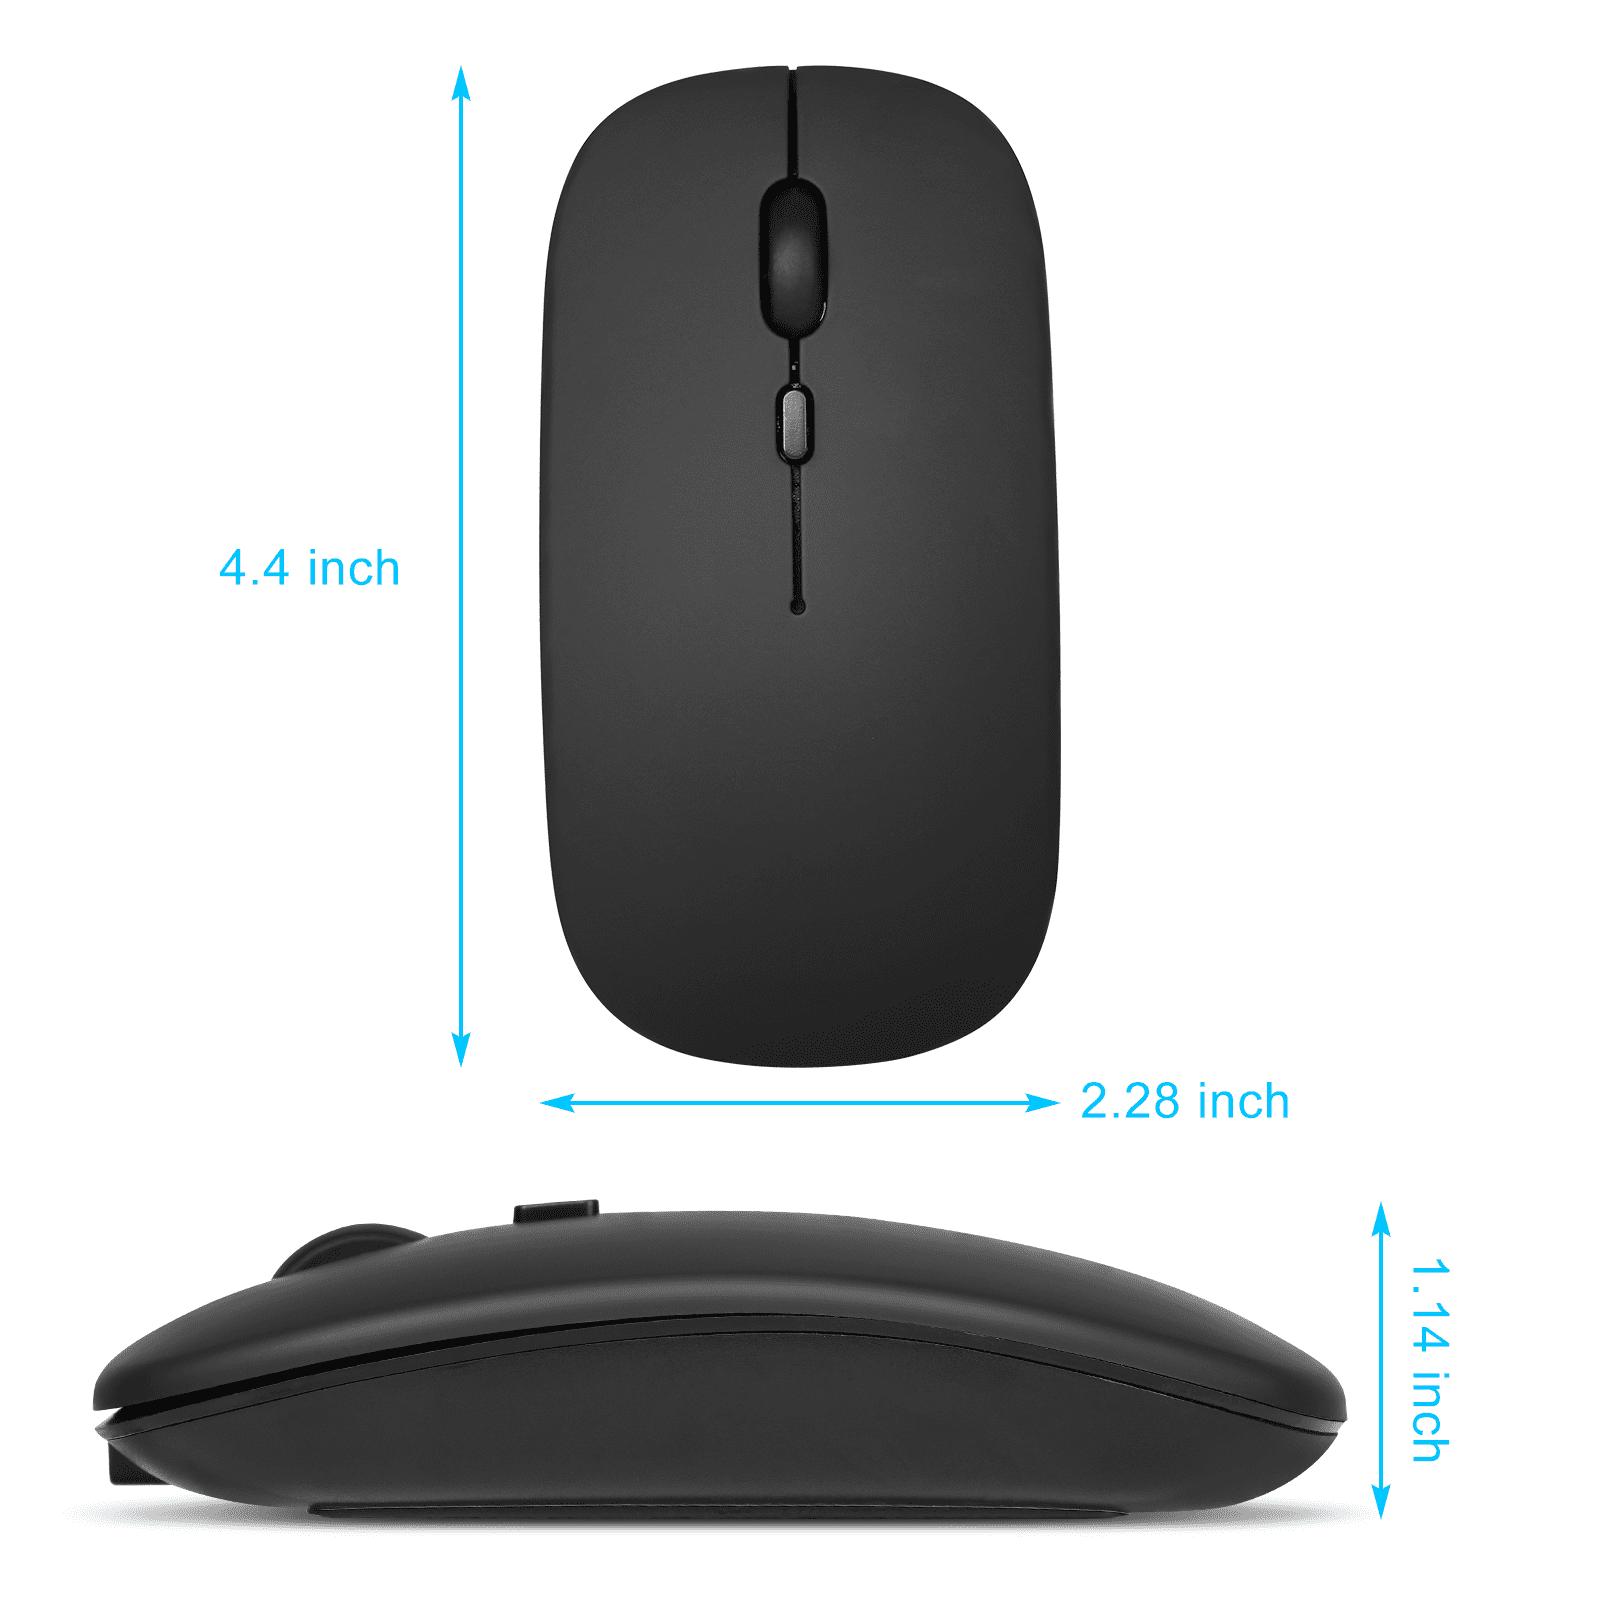 Bluetooth Mouse, Rechargeable Wireless Mouse for Android Tablet Bluetooth  Wireless Mouse Designed for Laptop / PC / Mac / iPad pro / Computer / Tablet  / Android - Black 